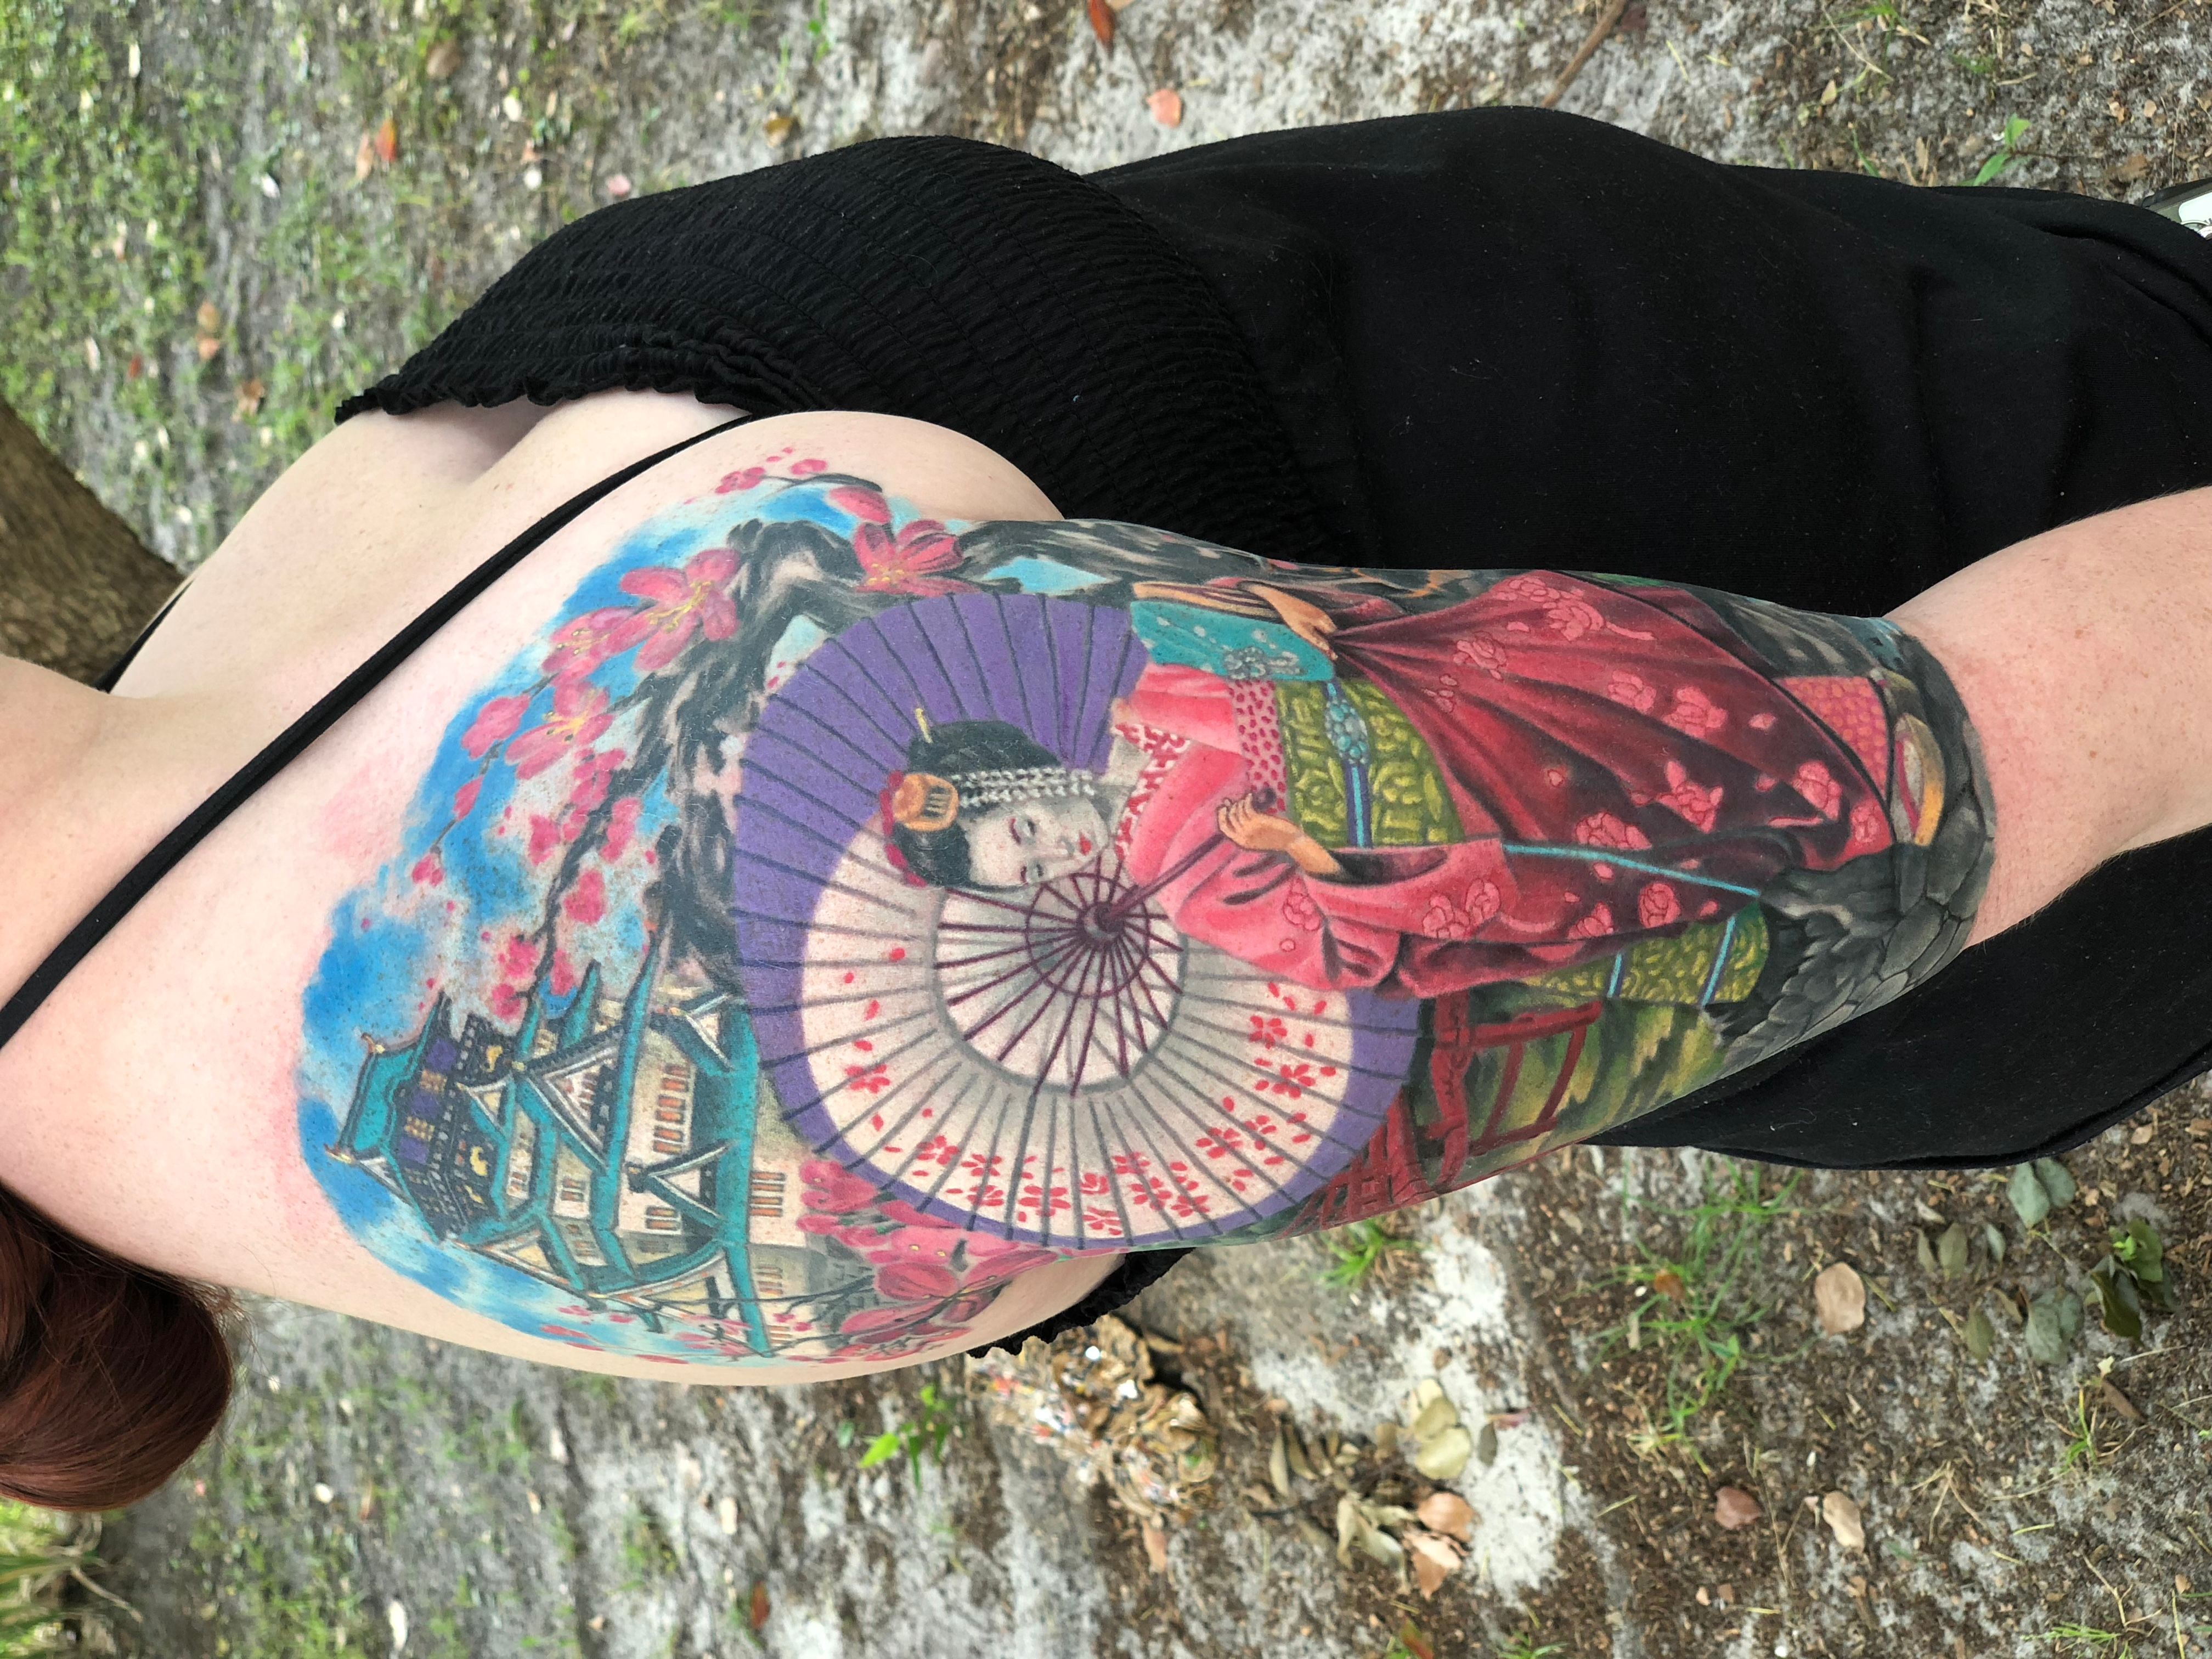 Ink Masters Tattoo Show showcases artistic talent at Pensacola Fairgrounds